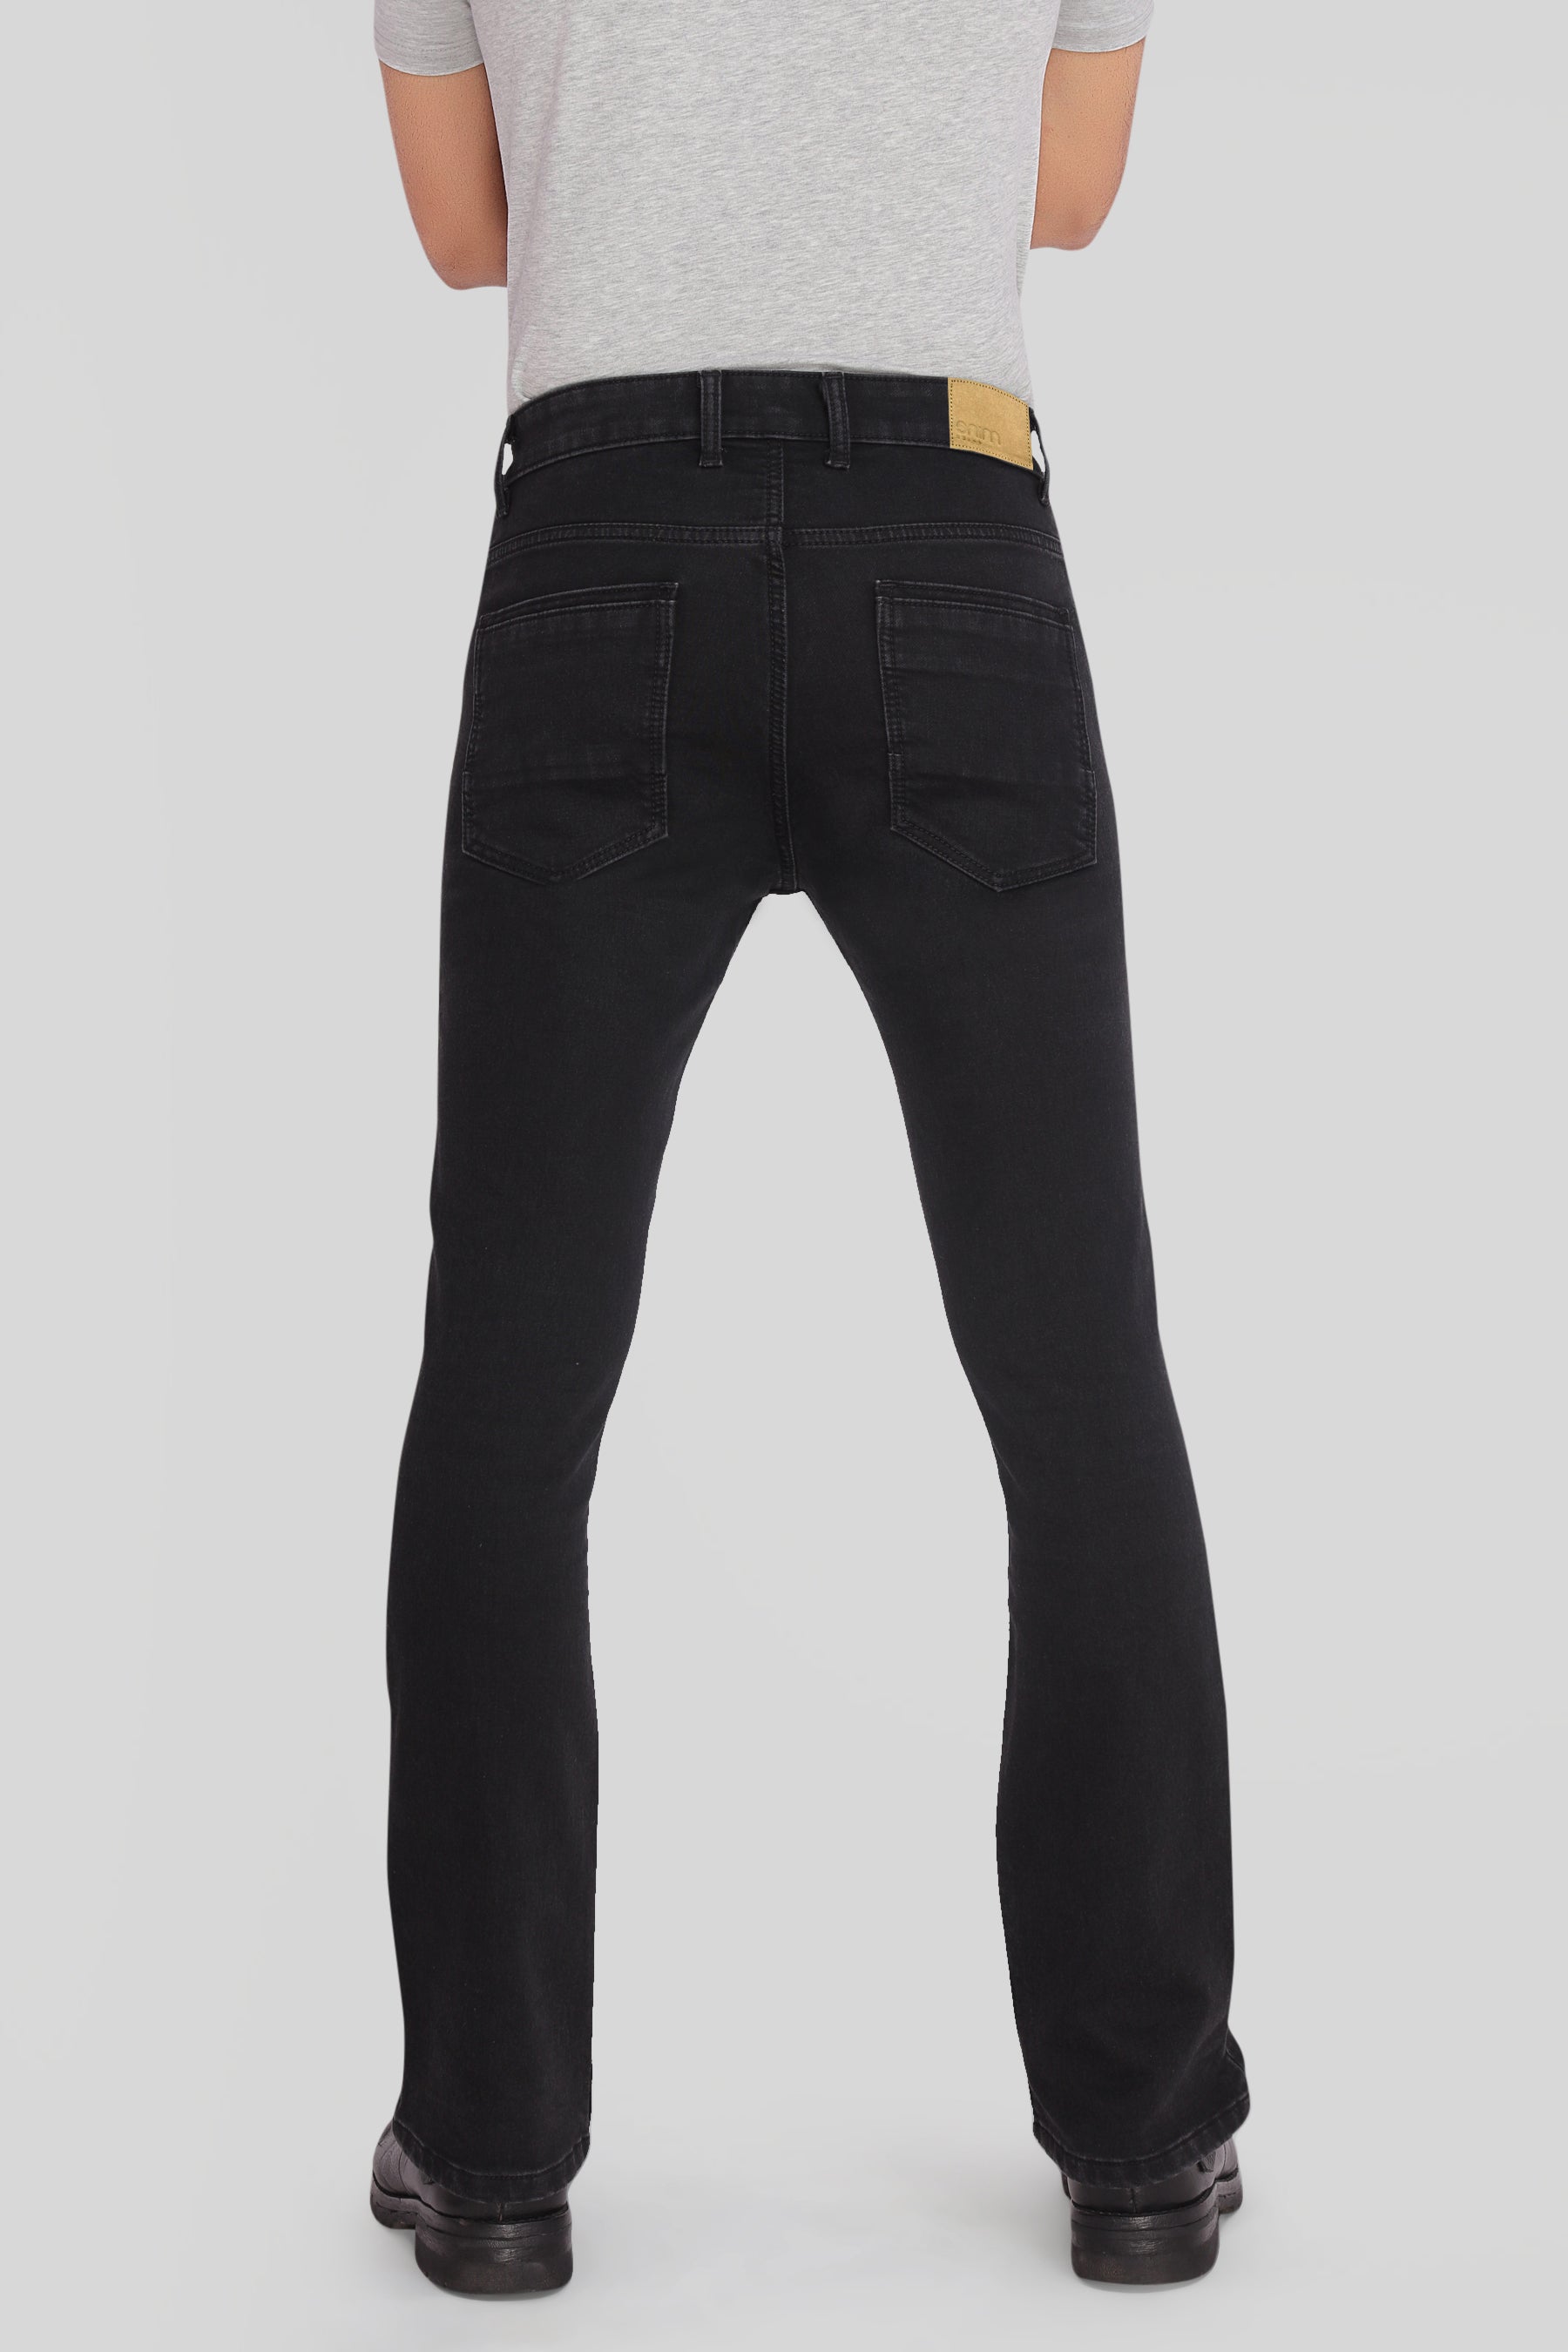 Buy BEAT LONDON By PEPE JEANS Men Caleb Slim Fit Bootcut Heavy Fade  Stretchable Jeans - Jeans for Men 21391672 | Myntra